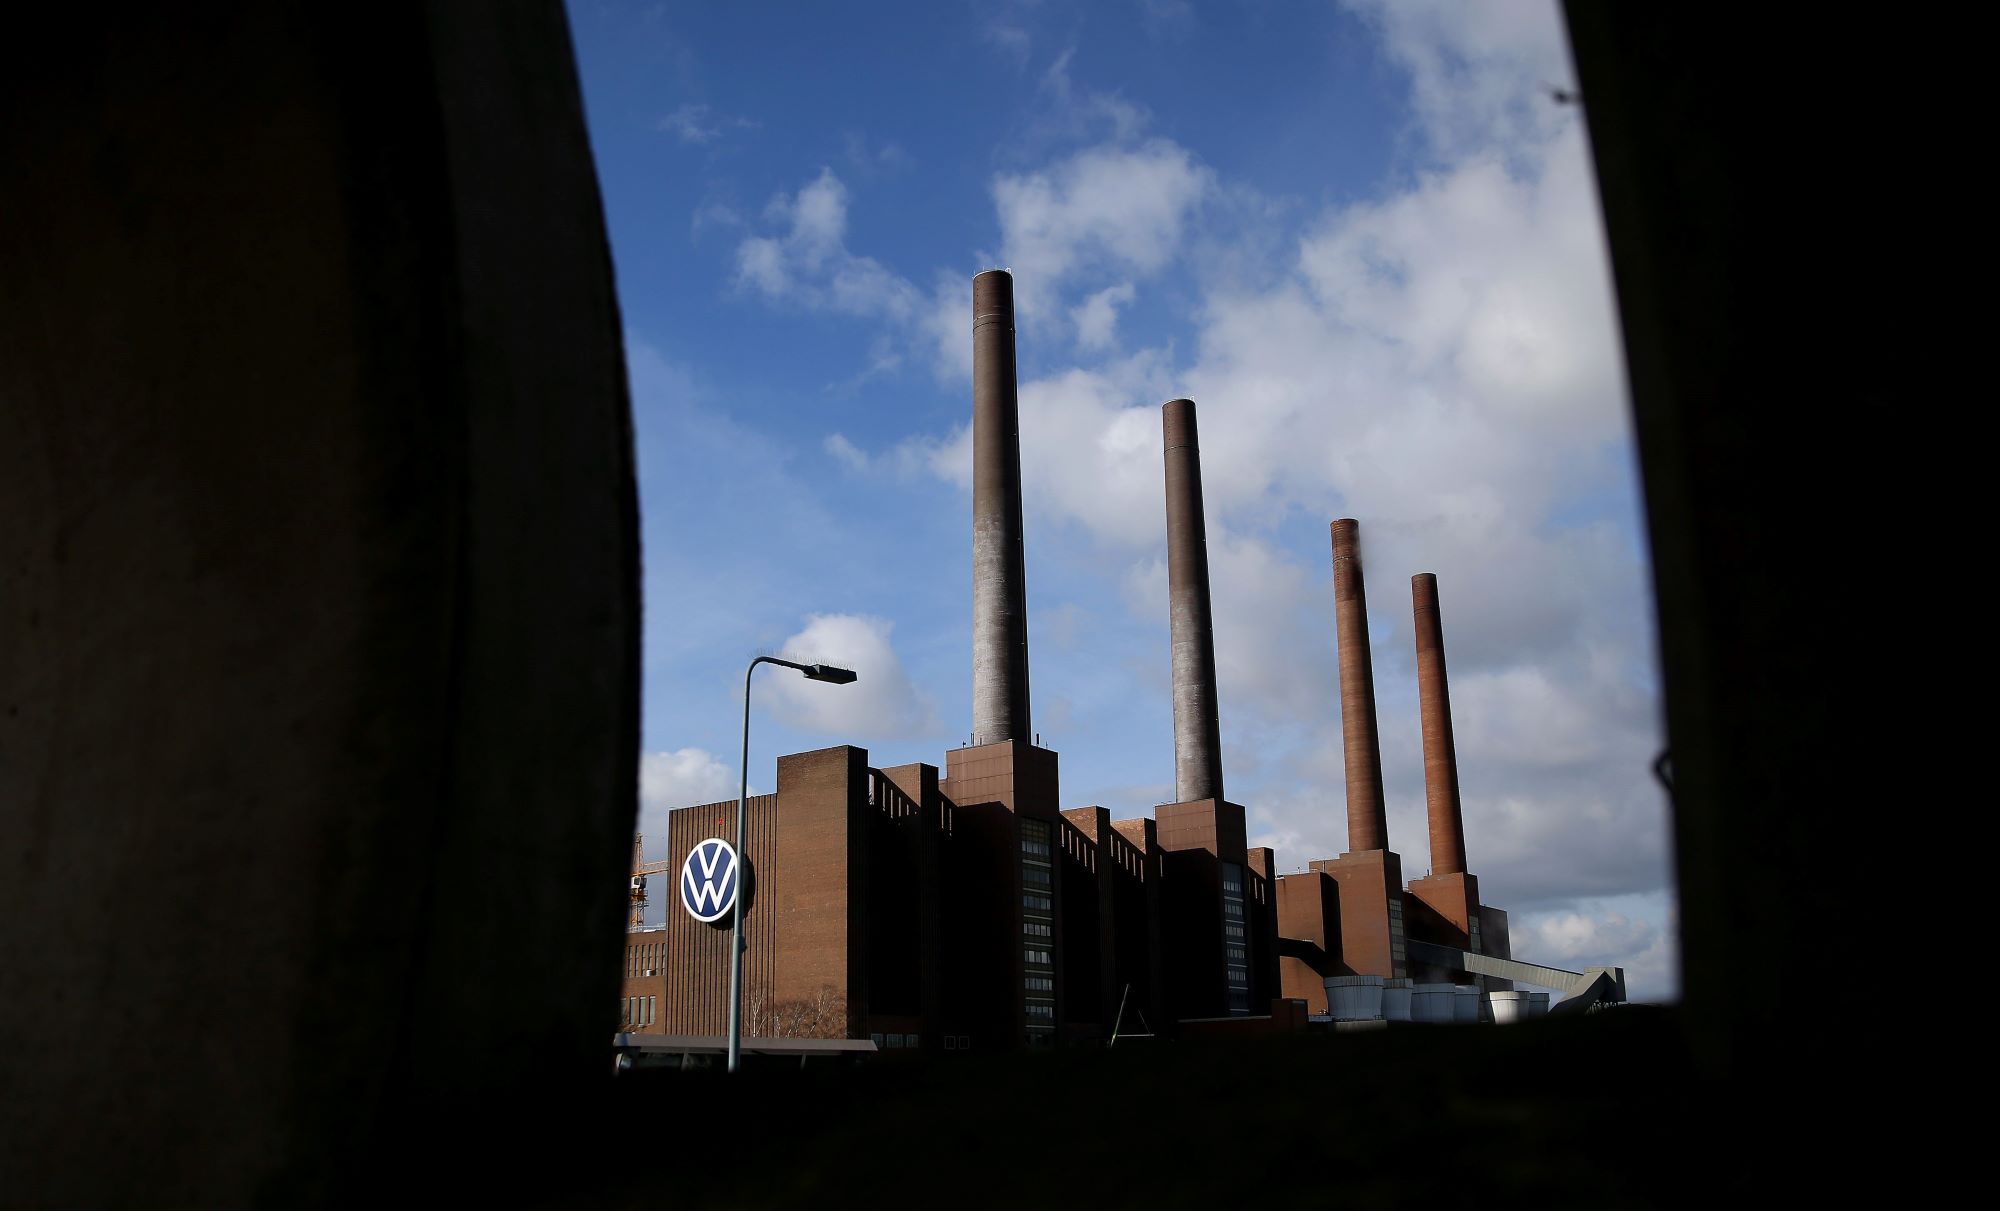 A Volkswagen (VW) power plant at its headquarters in Germany